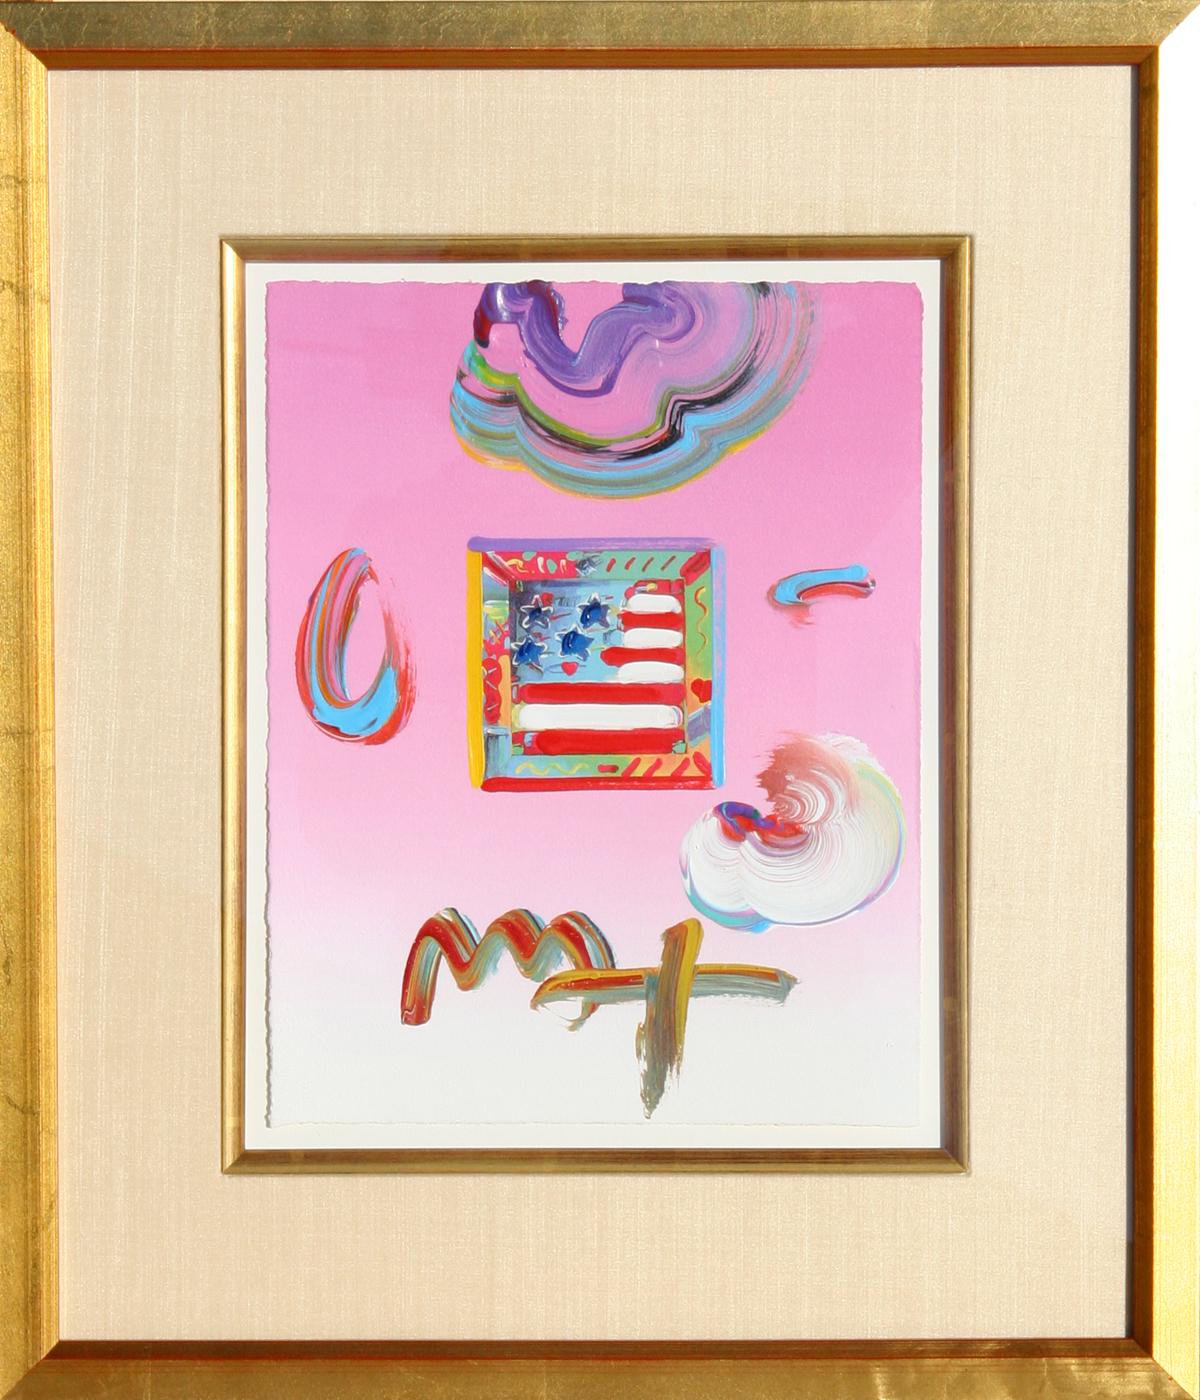 peter max american flag painting